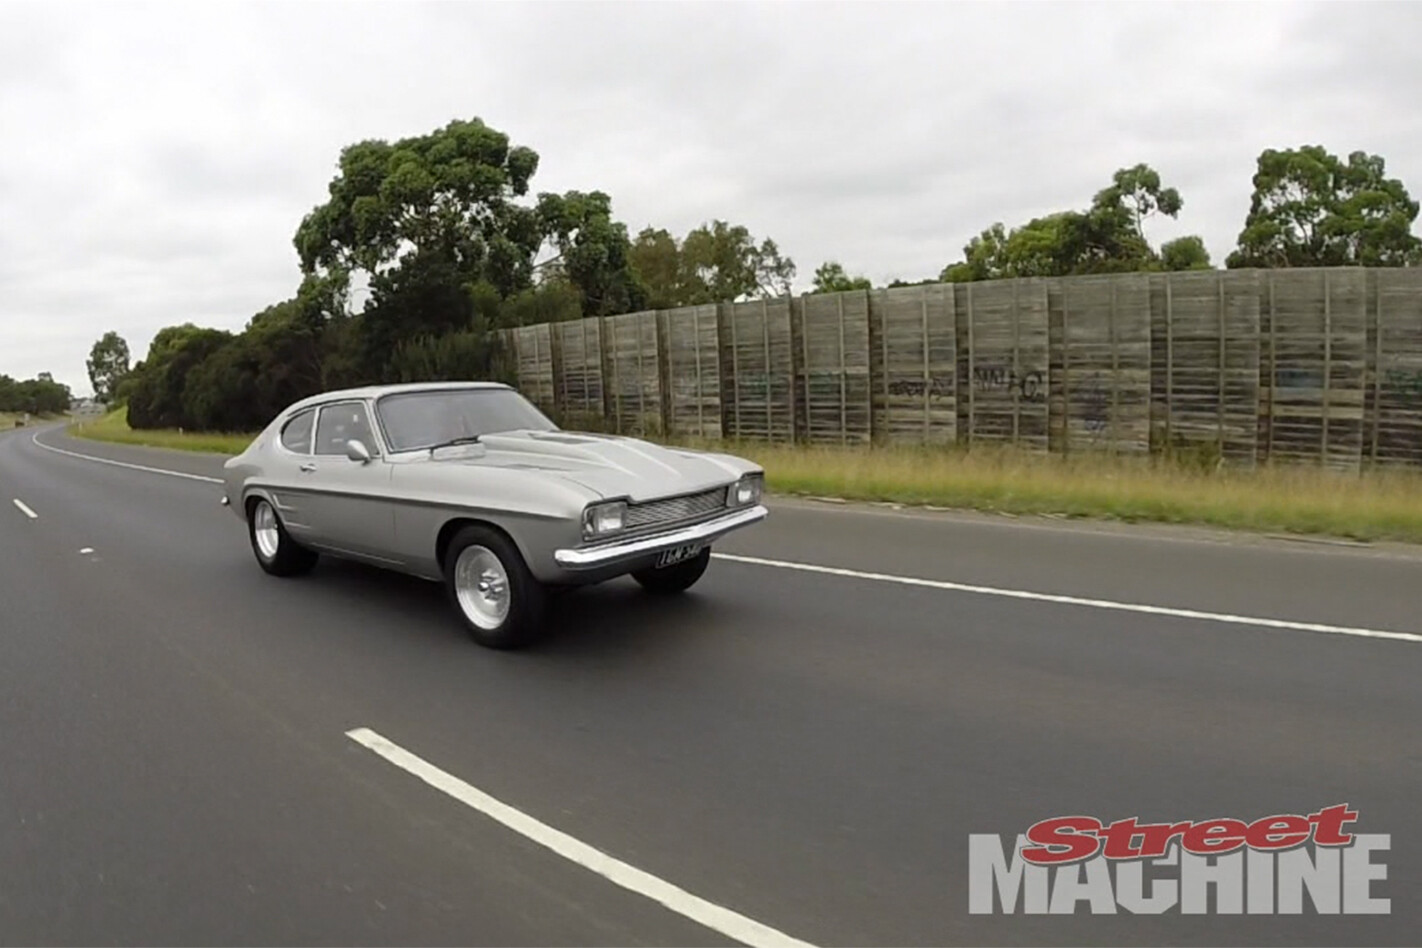 VIDEO: CRUISING WITH AN EIGHT-SECOND CAPRI